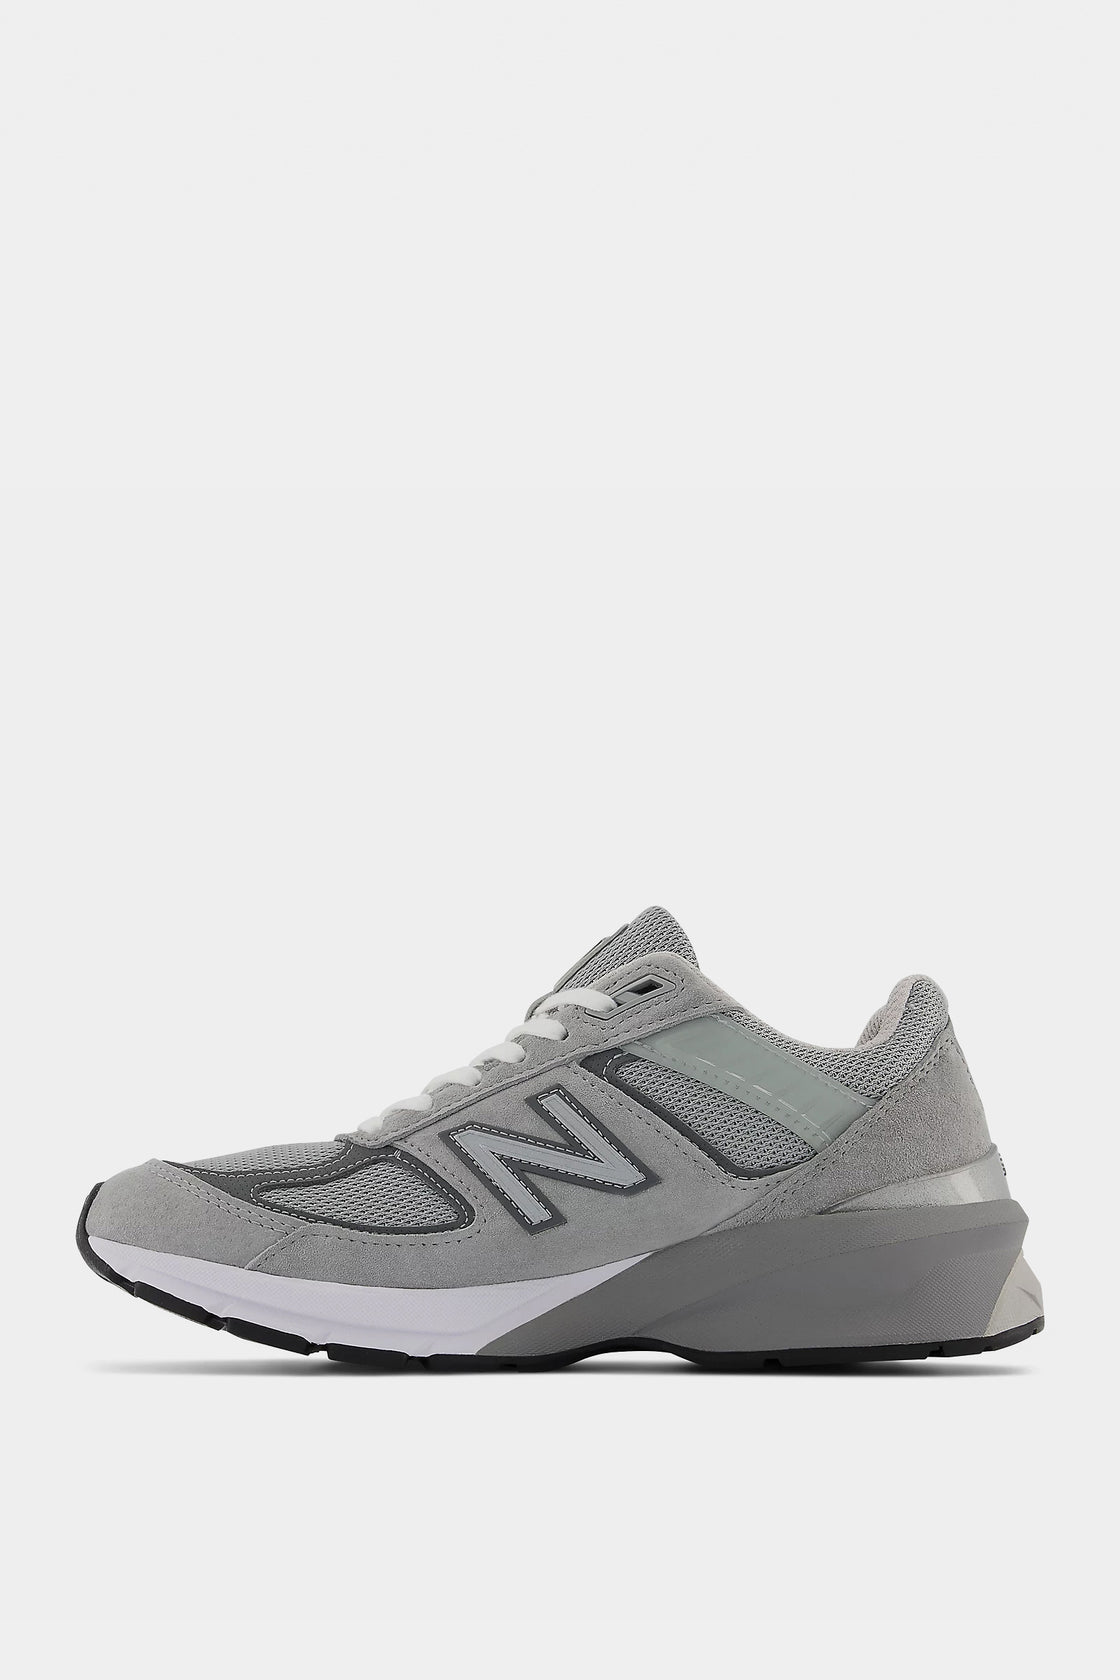 Womens New Balance 990 Sneaker Grey | Assembly Label